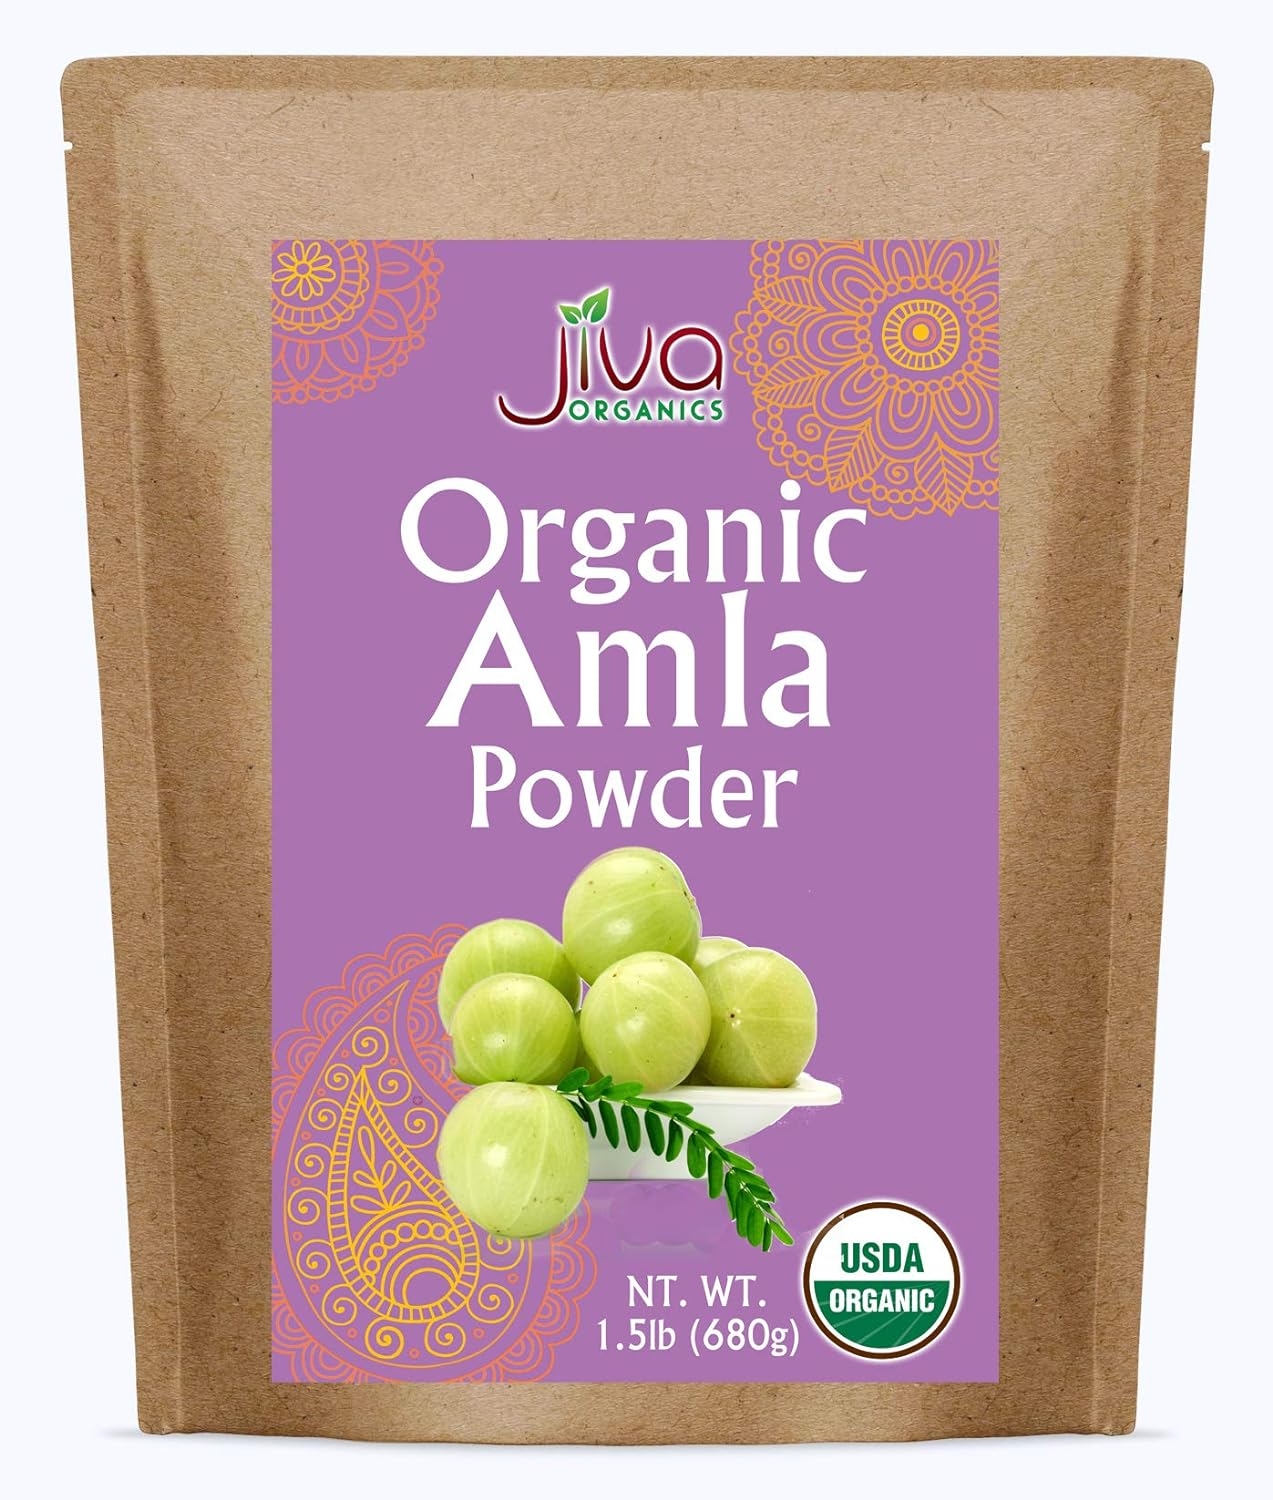 Organic Pure Amla Berry Powder, 1.5 Pound - Food Grade & Non-GMO - for Cooking & Beauty Care - Supports Hair Growth, Immunity, & Digestion - by Jiva Organics